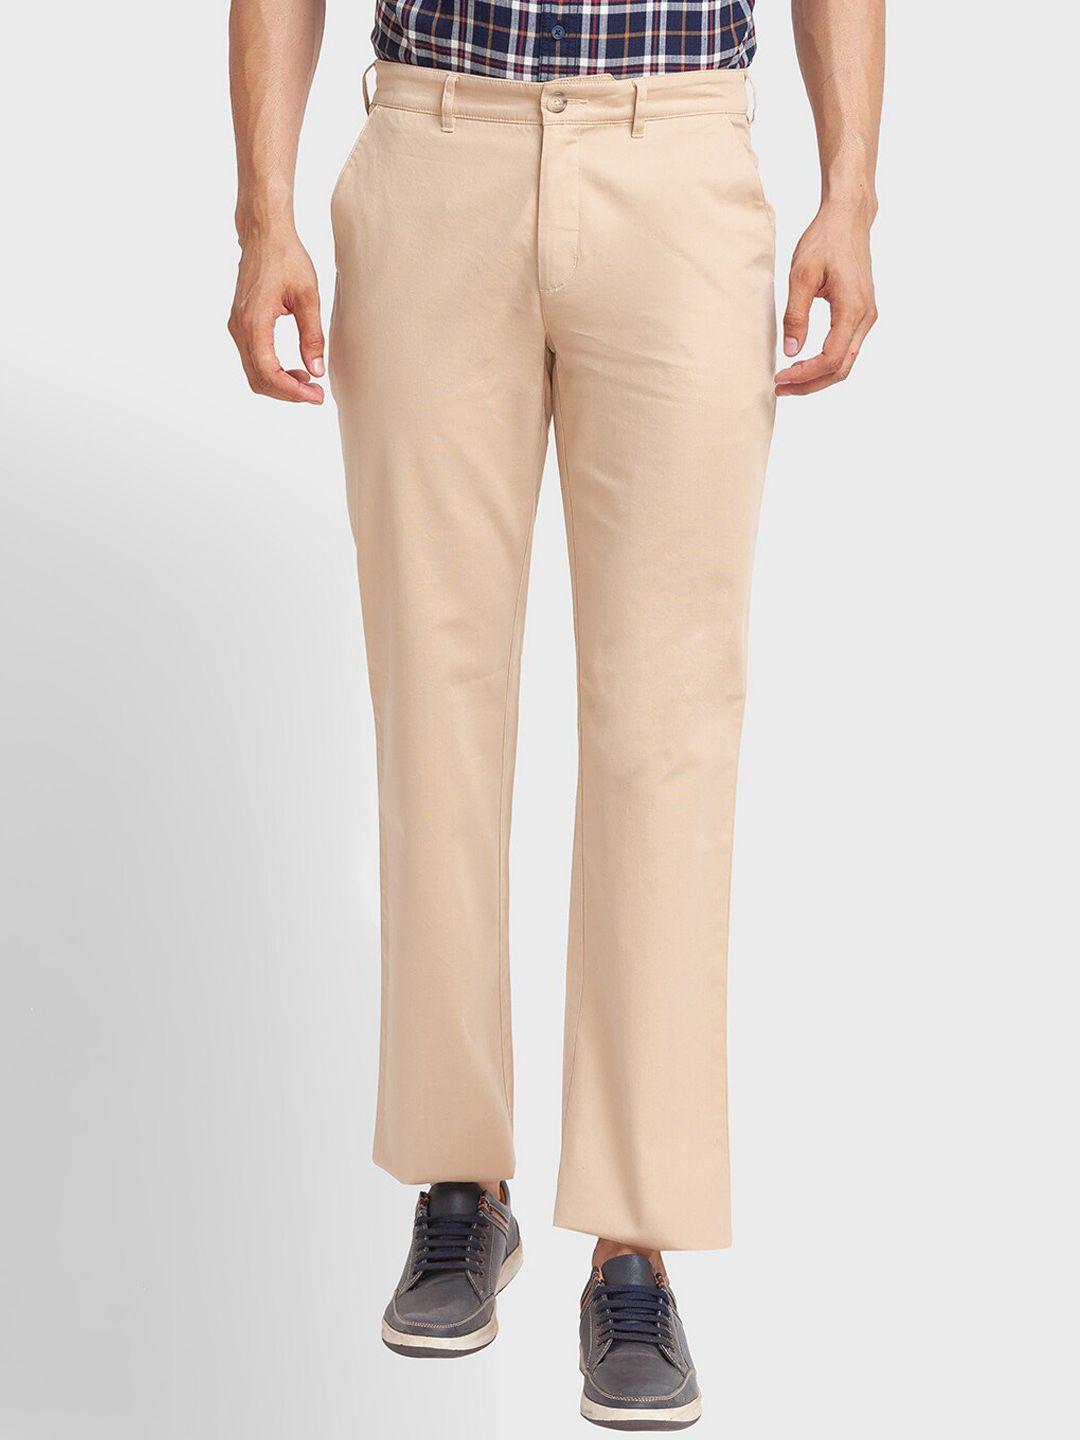 colorplus men mid-rise casual chinos trousers